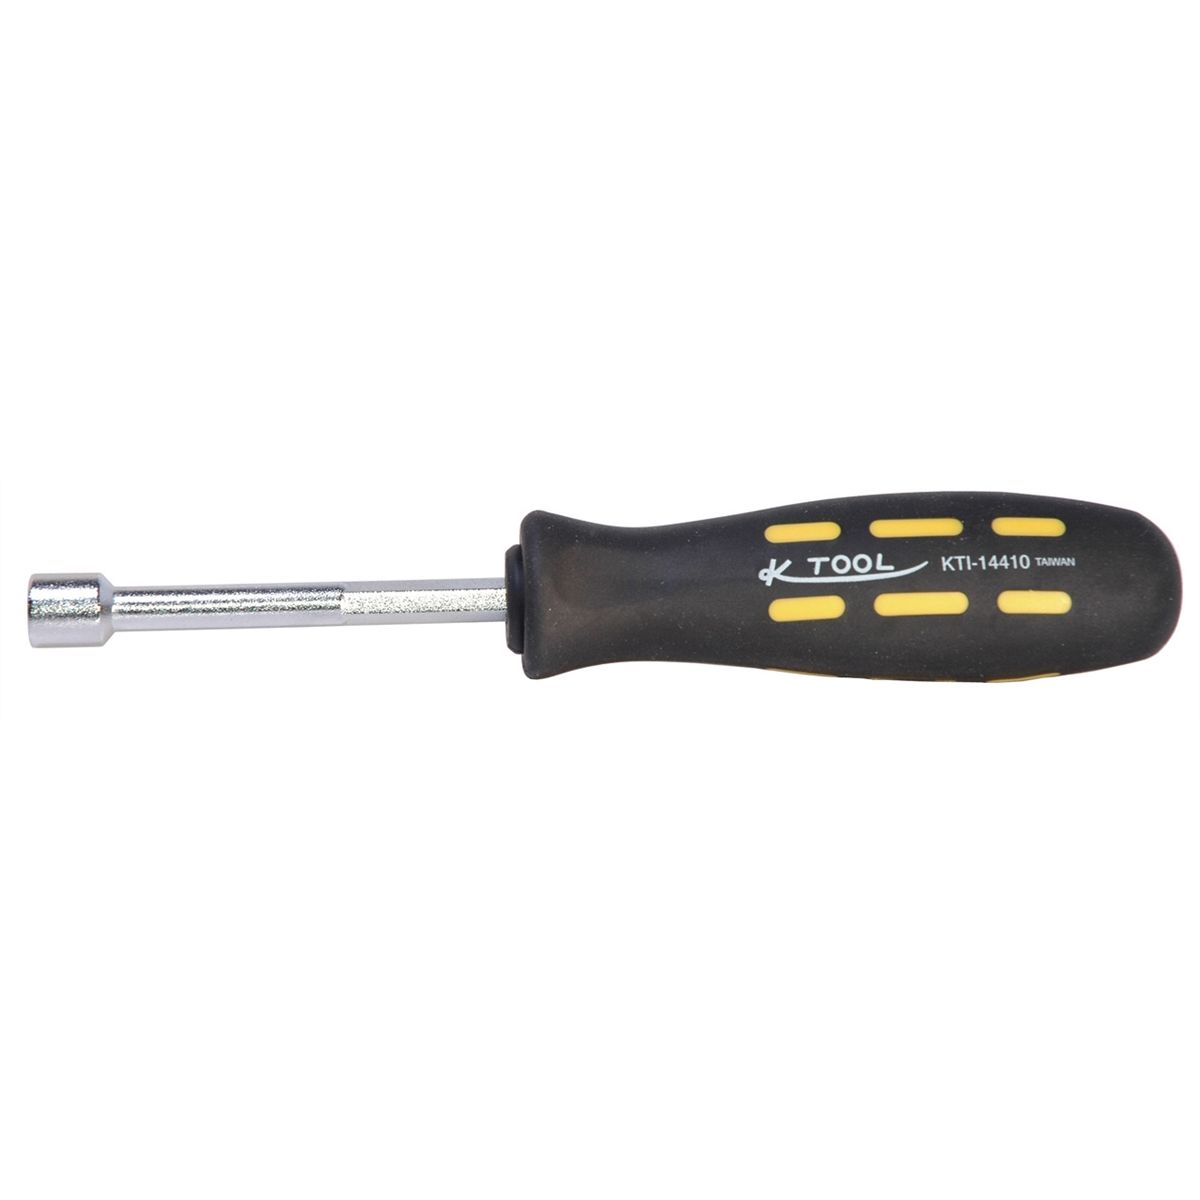 5/16" x 3" Fractional Nut Driver